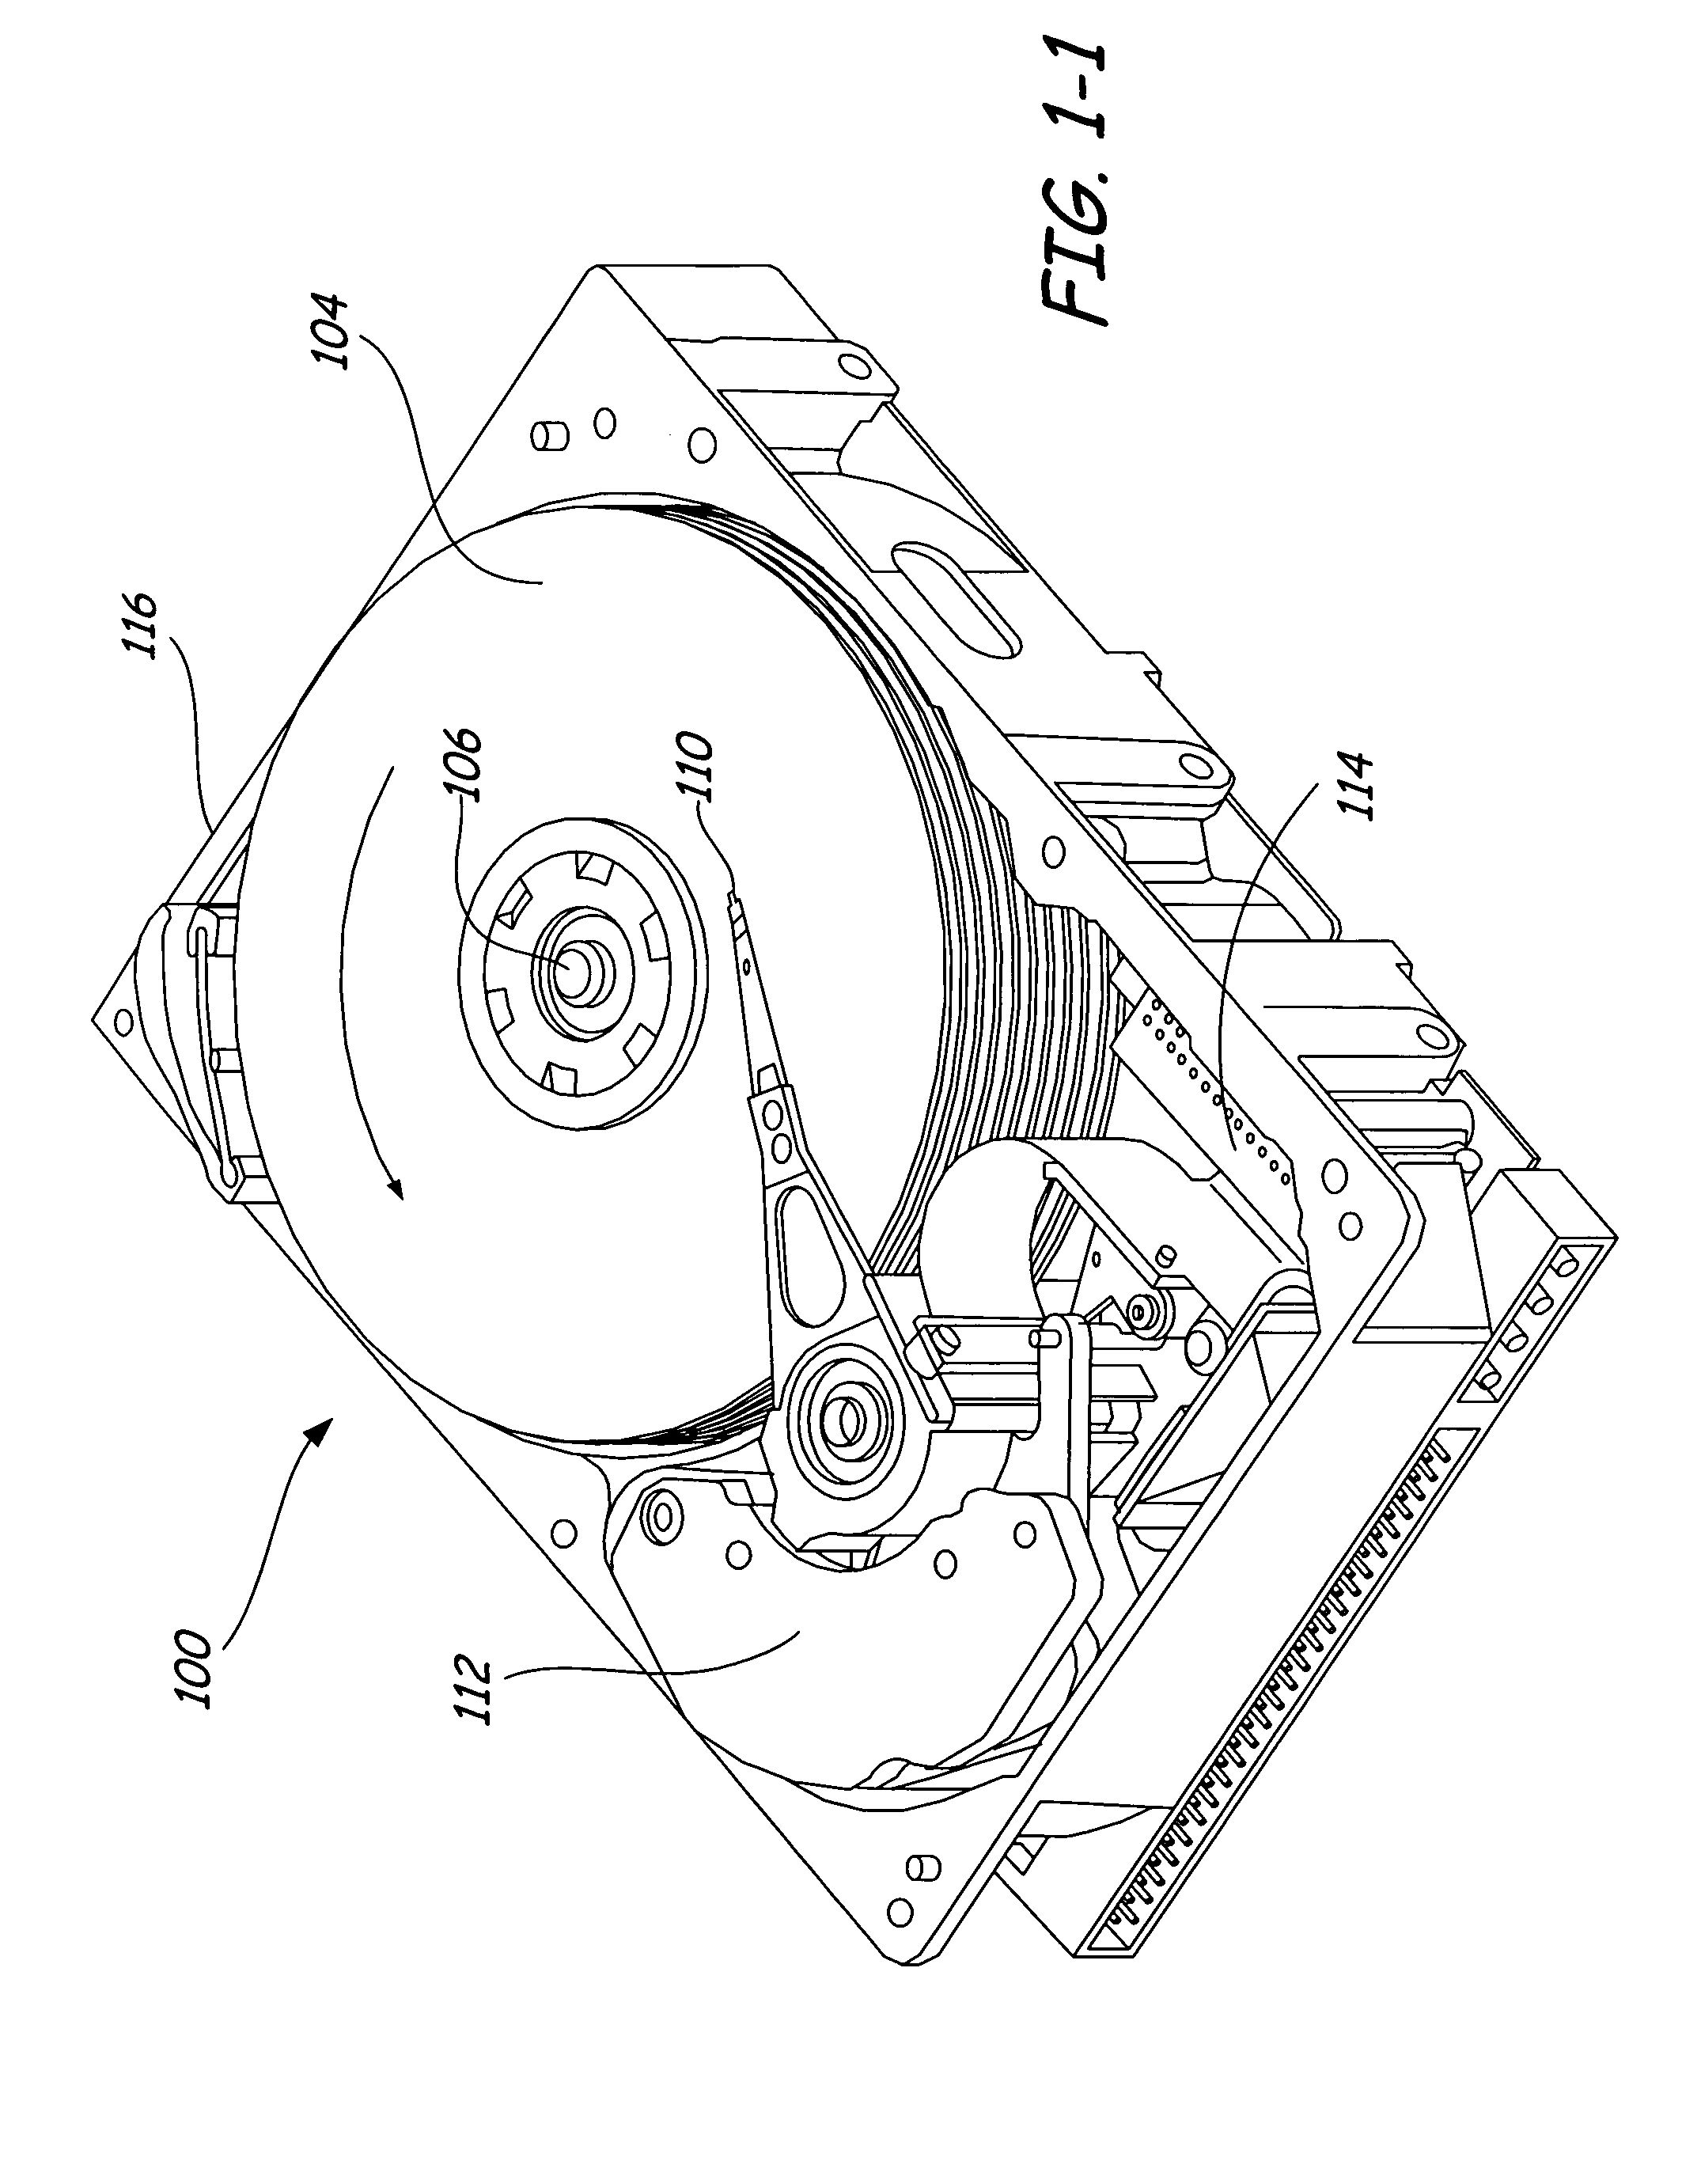 Differential/dual CPP recording head